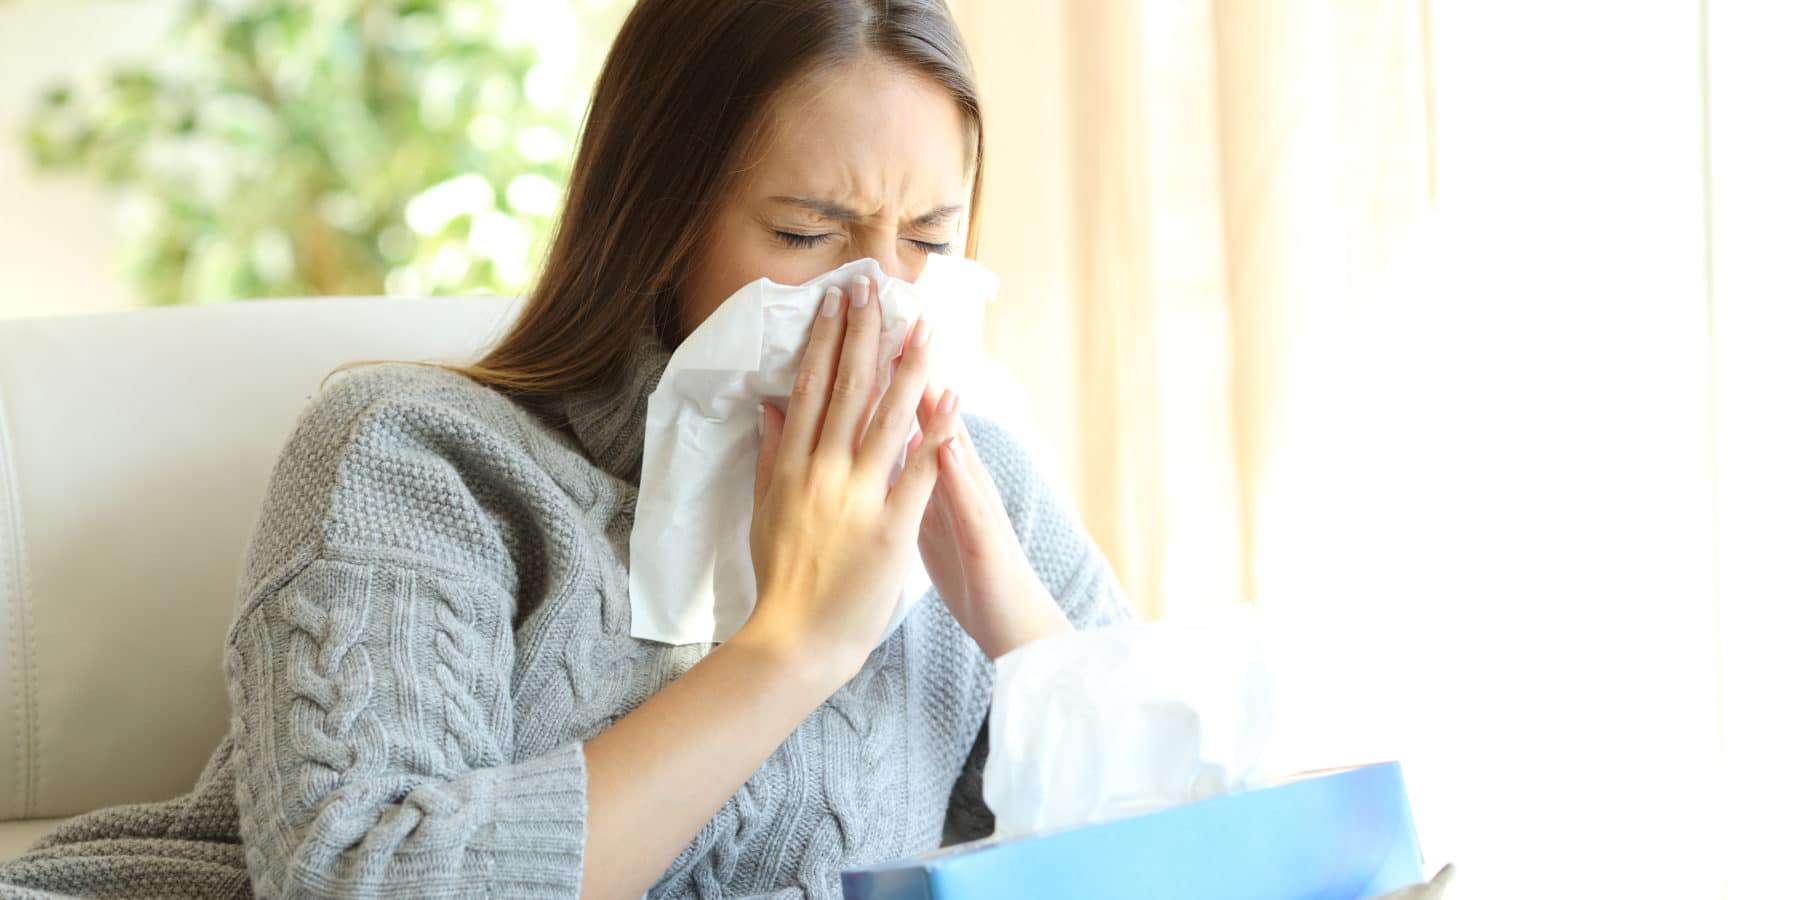 Woman blowing her nose due to a dust allergy.